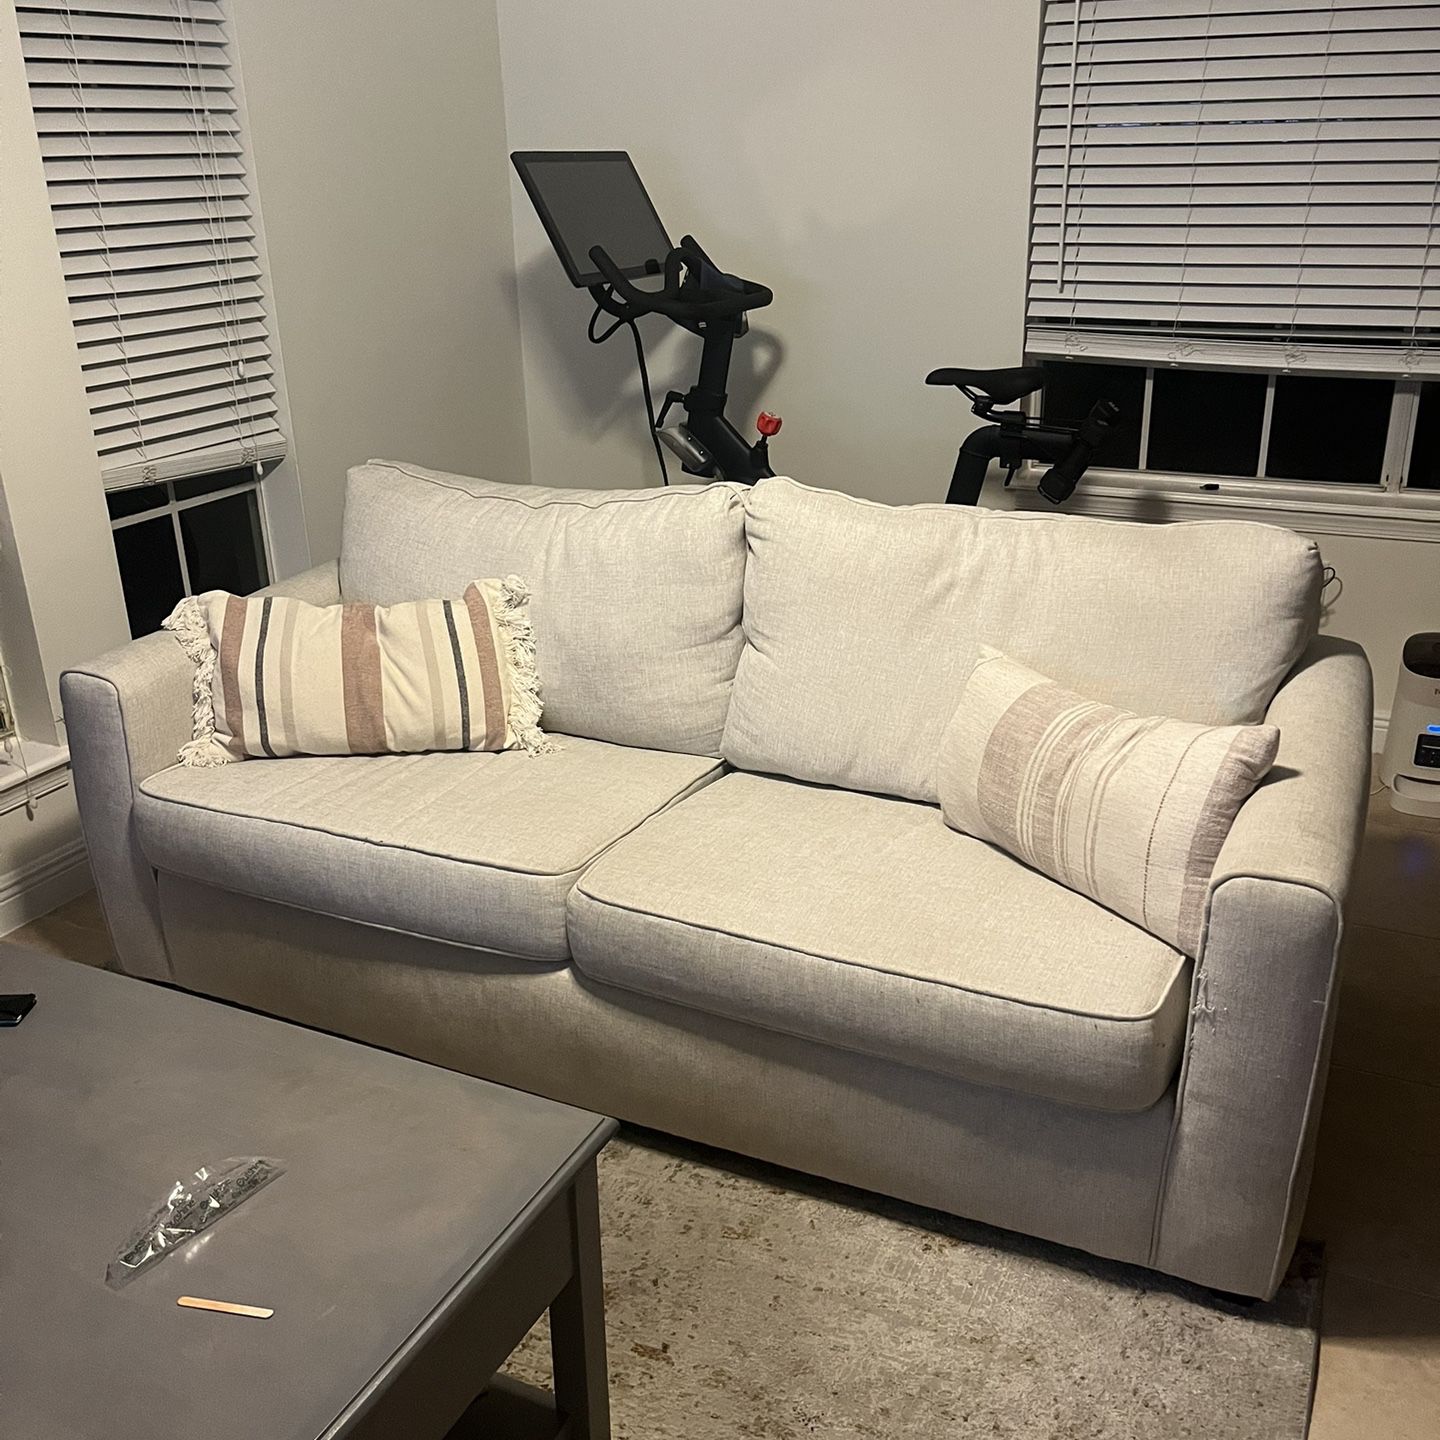 Couch For Sale - Delray Beach 